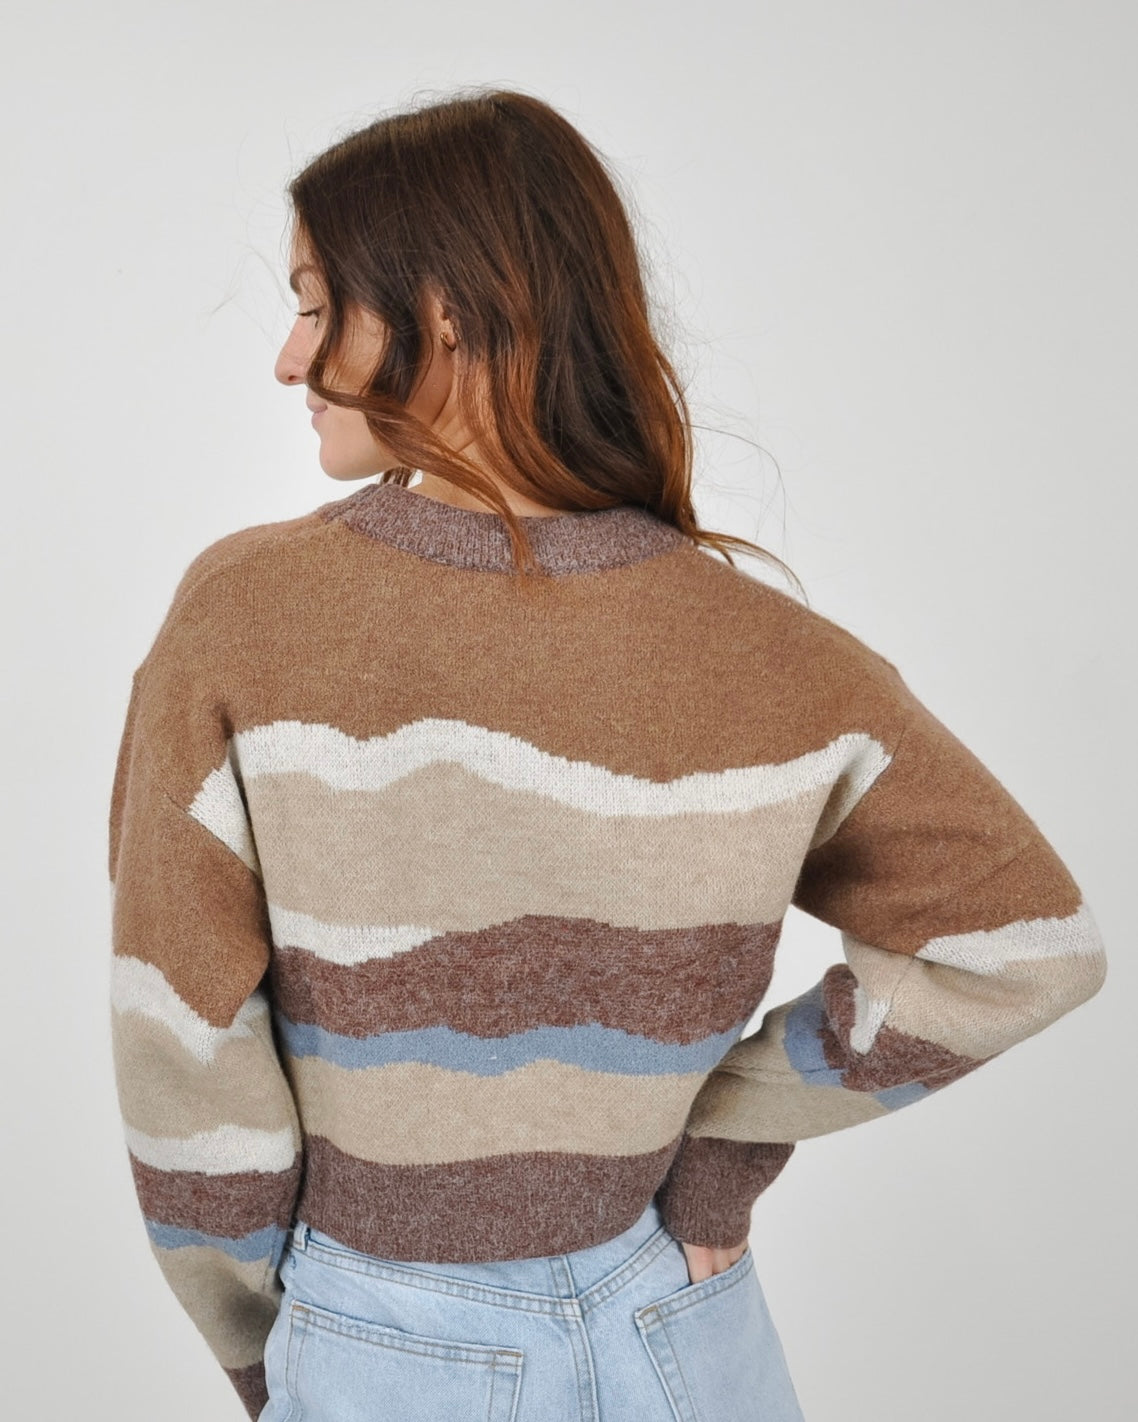 The Scenic Route Sweater